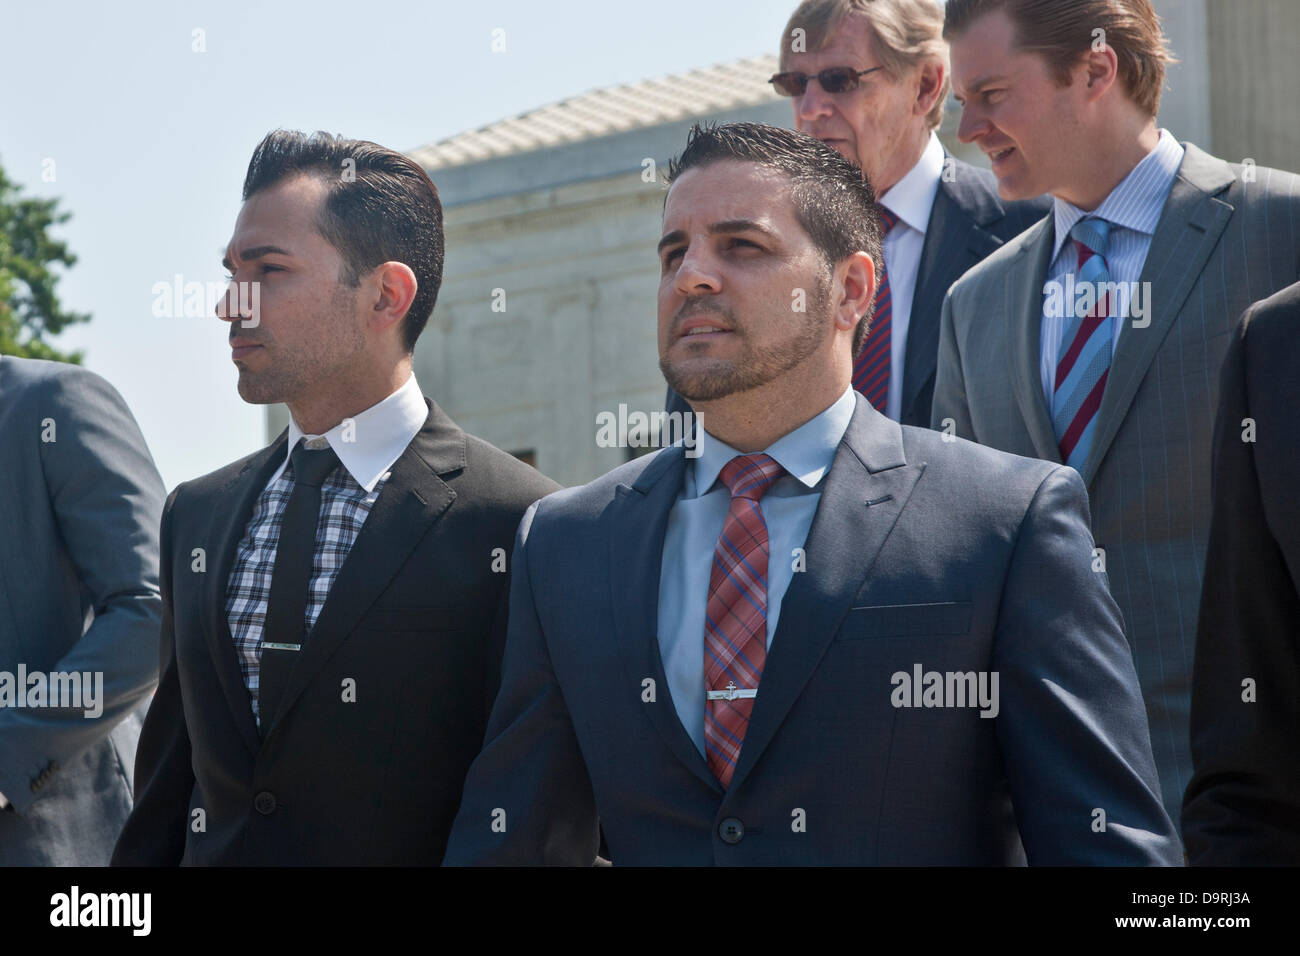 Washington DC, USA. 25th June 2013. Paul Katami (left) and Jeffrey Zarrillo (right) lead plaintiffs for Hollingsworth v. Perry to overturn Proposition 8 leave the US Supreme Court on Tuesday. Photo Credit: Rudy K/Alamy Live News Stock Photo